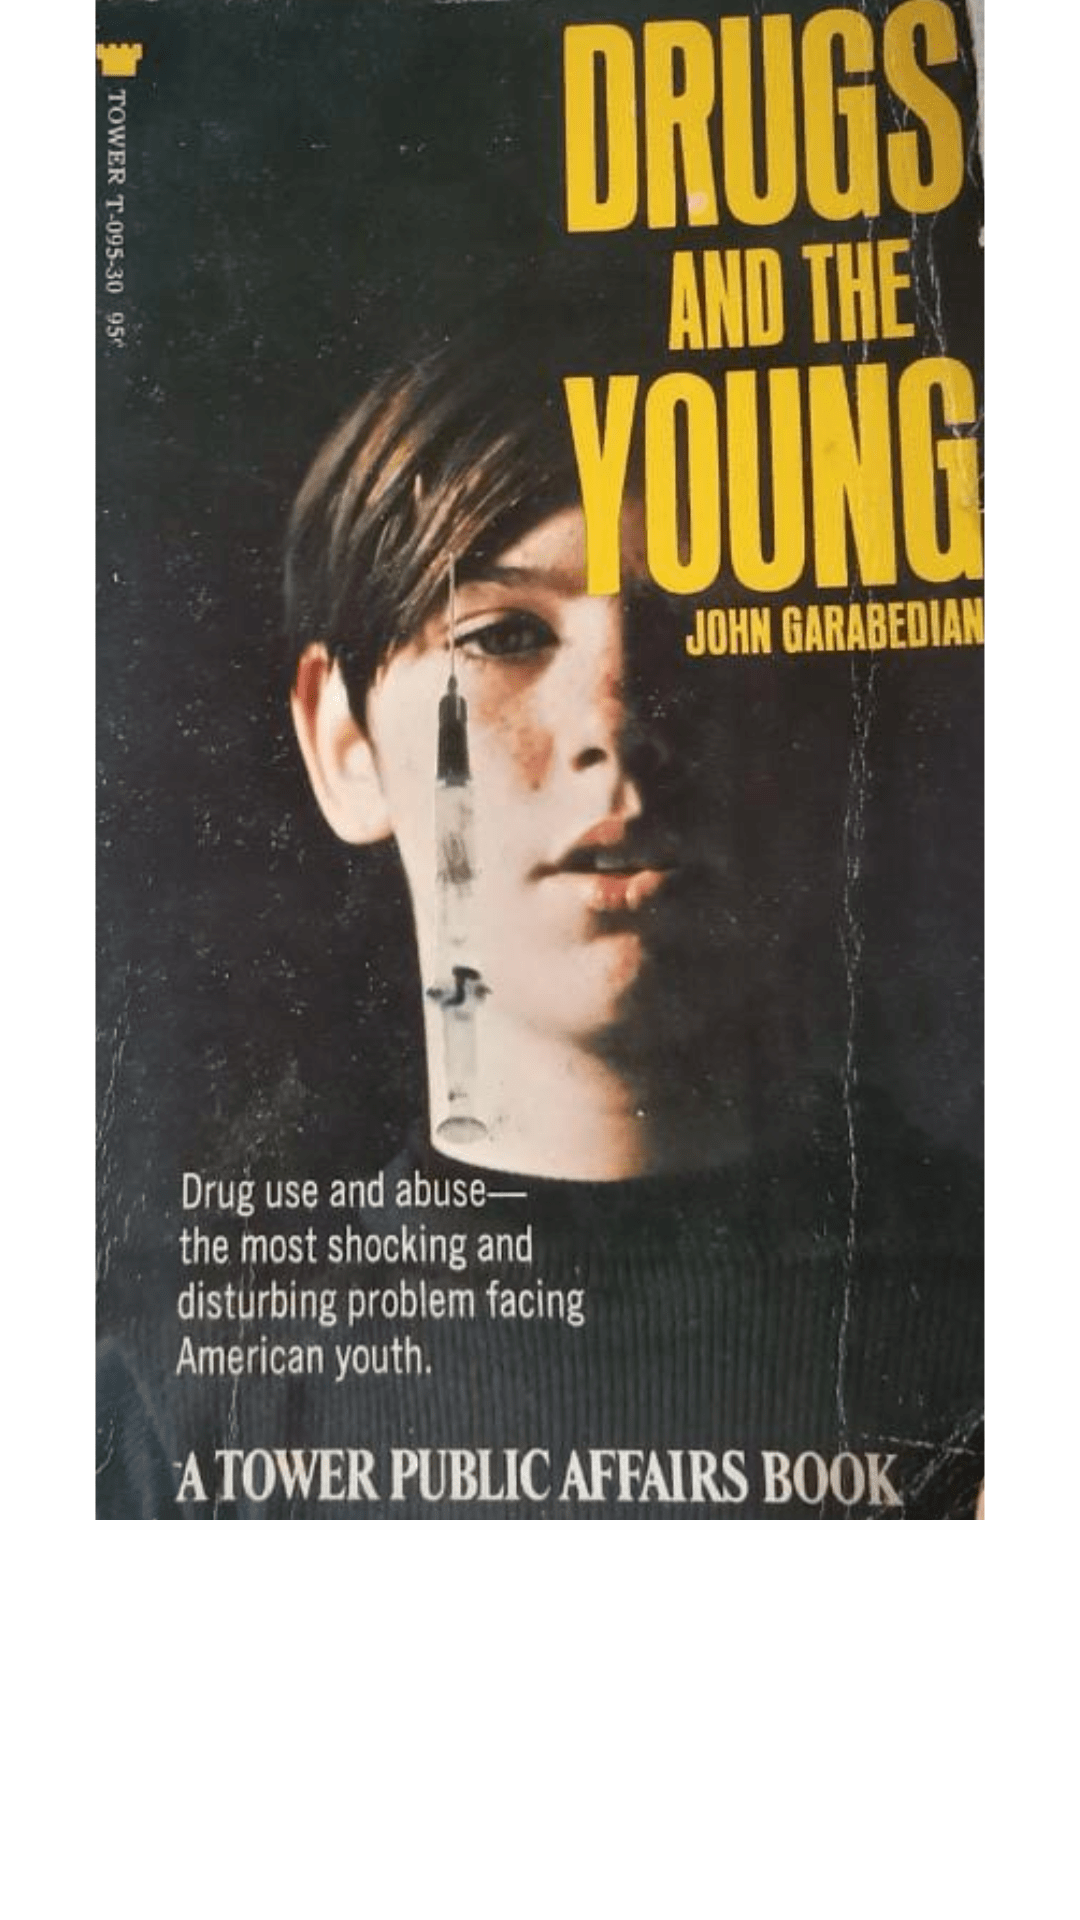 Drugs and the Young by John Garabedian